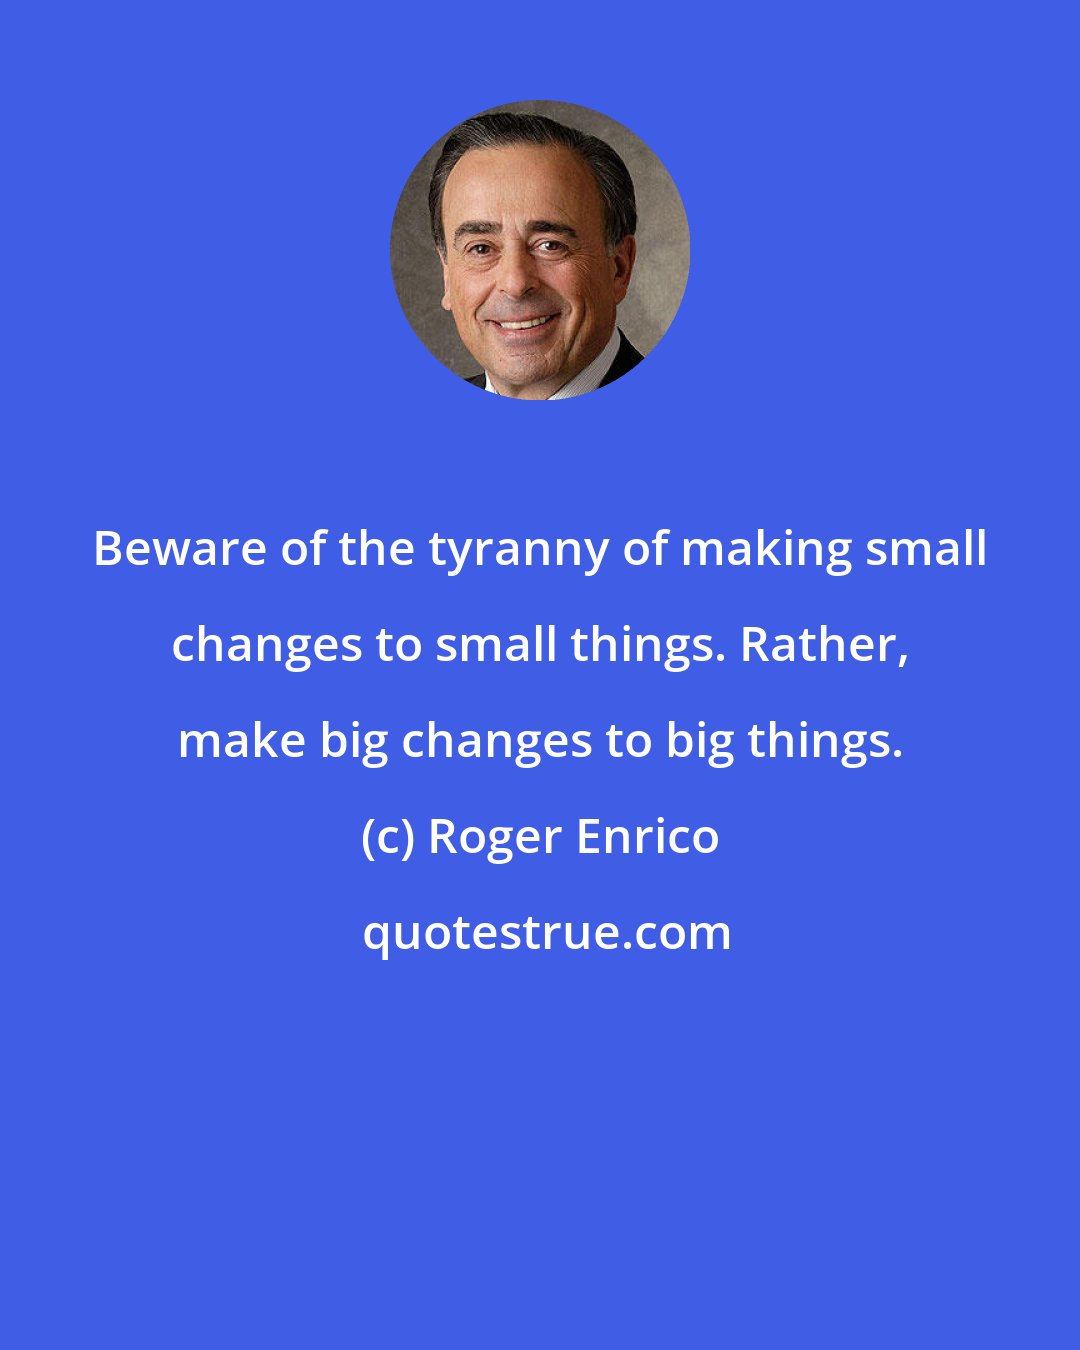 Roger Enrico: Beware of the tyranny of making small changes to small things. Rather, make big changes to big things.